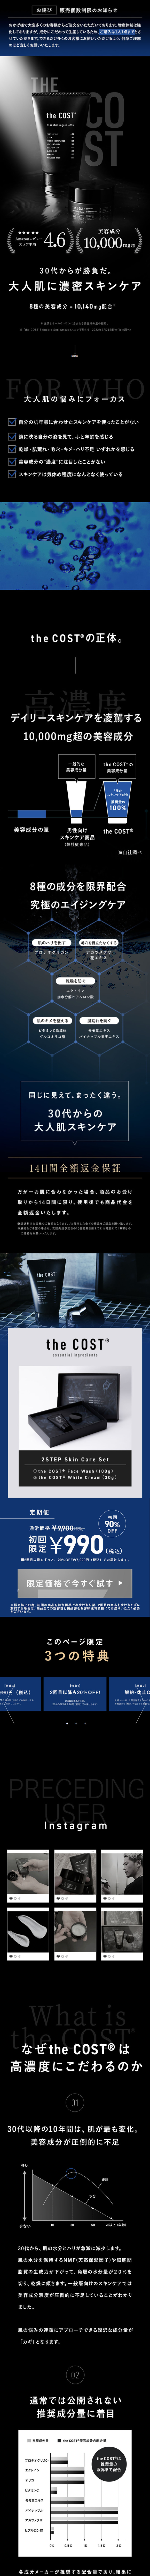 the COST_pc_1